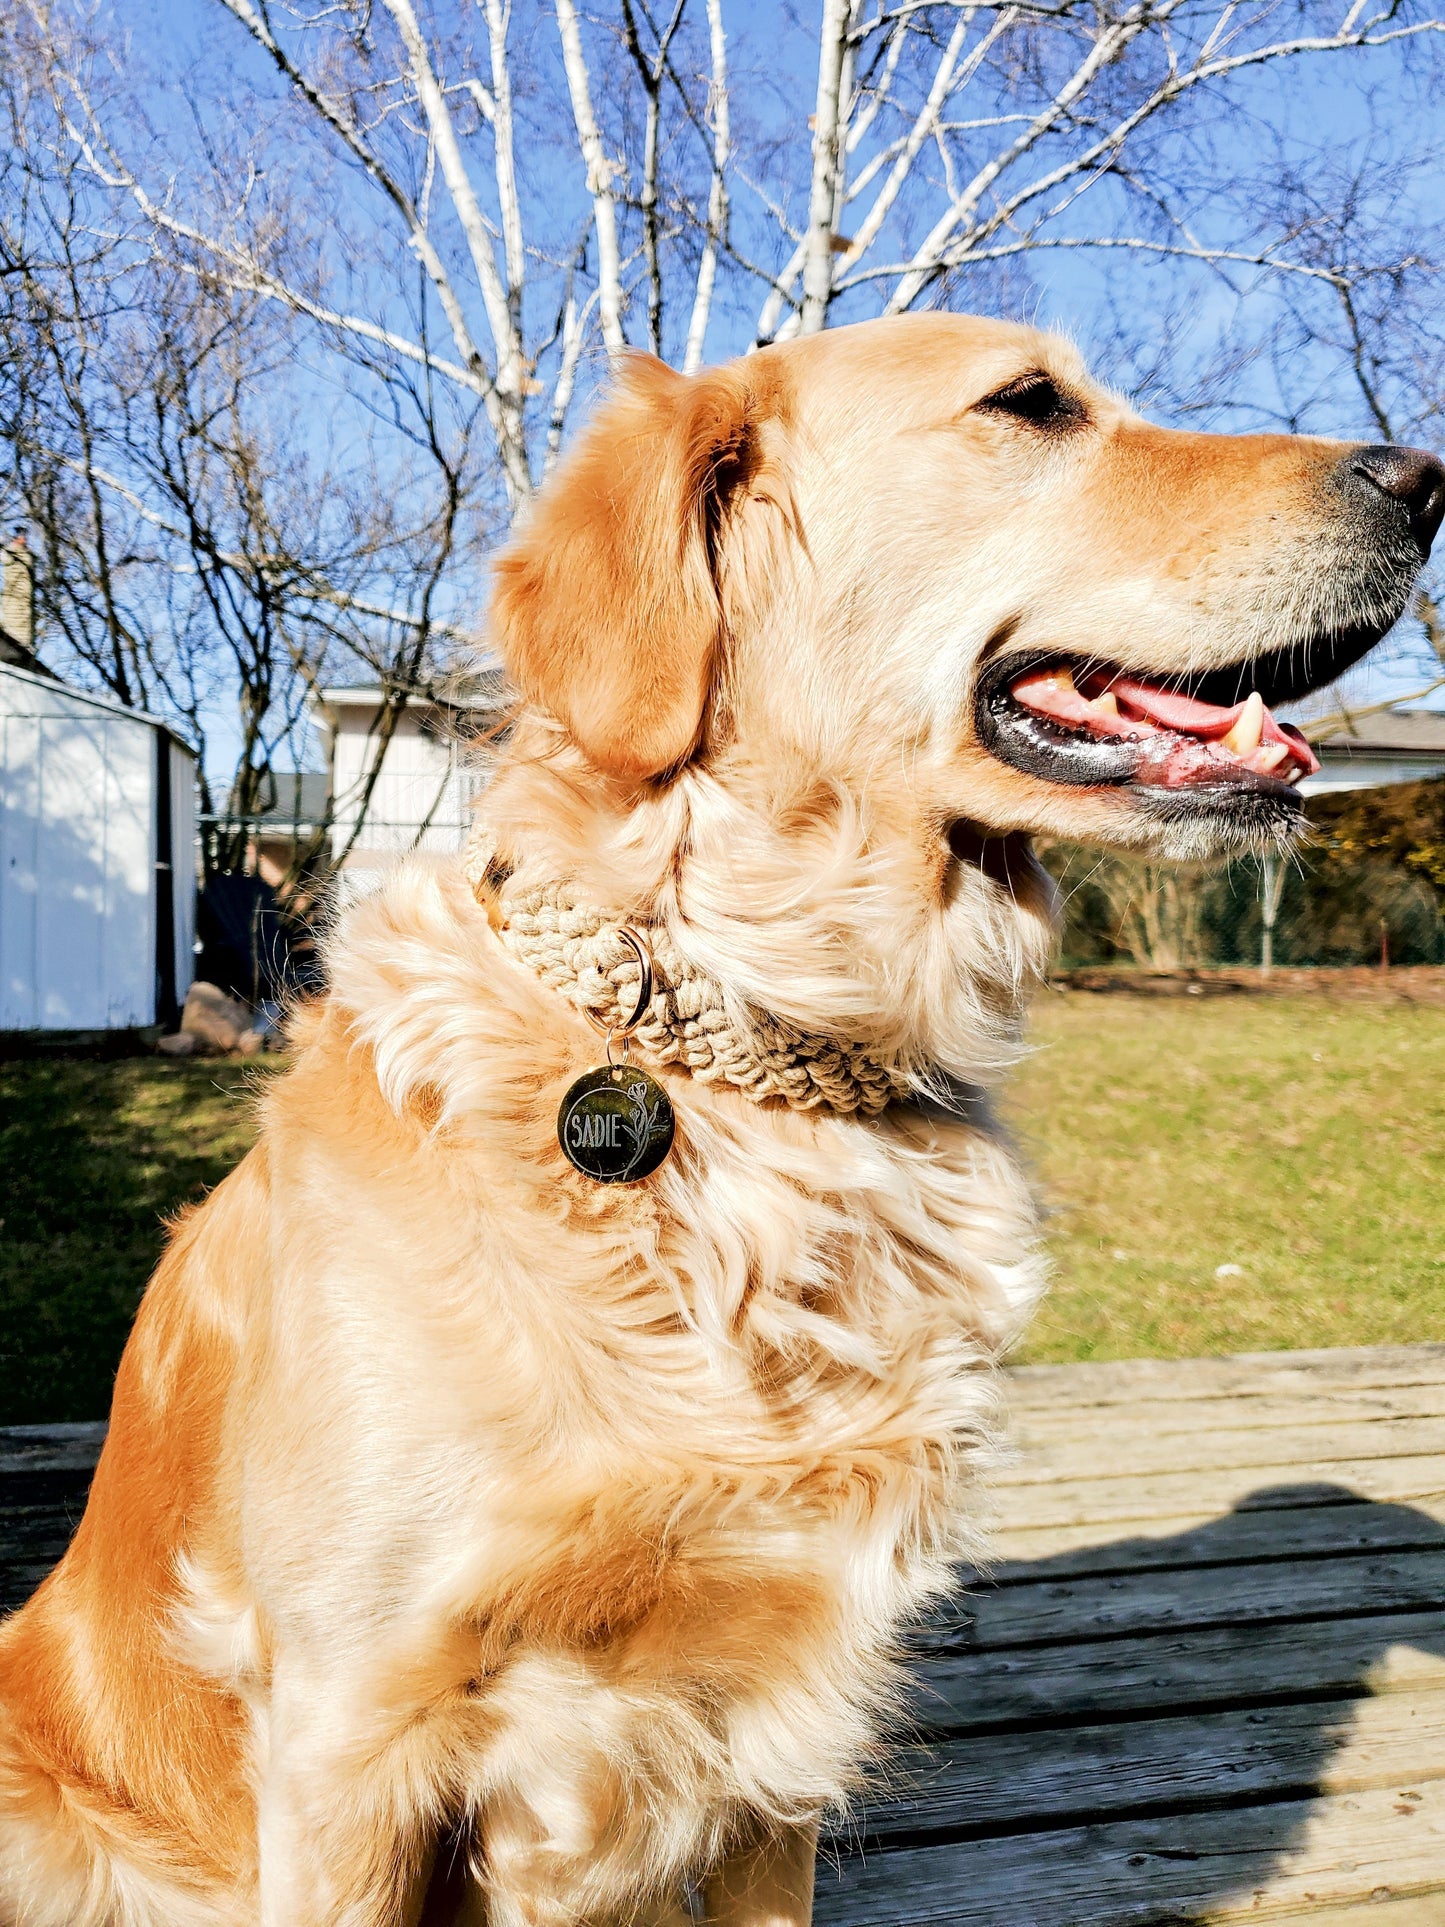 Golden retriever wearing a Round dog tag for dog collar